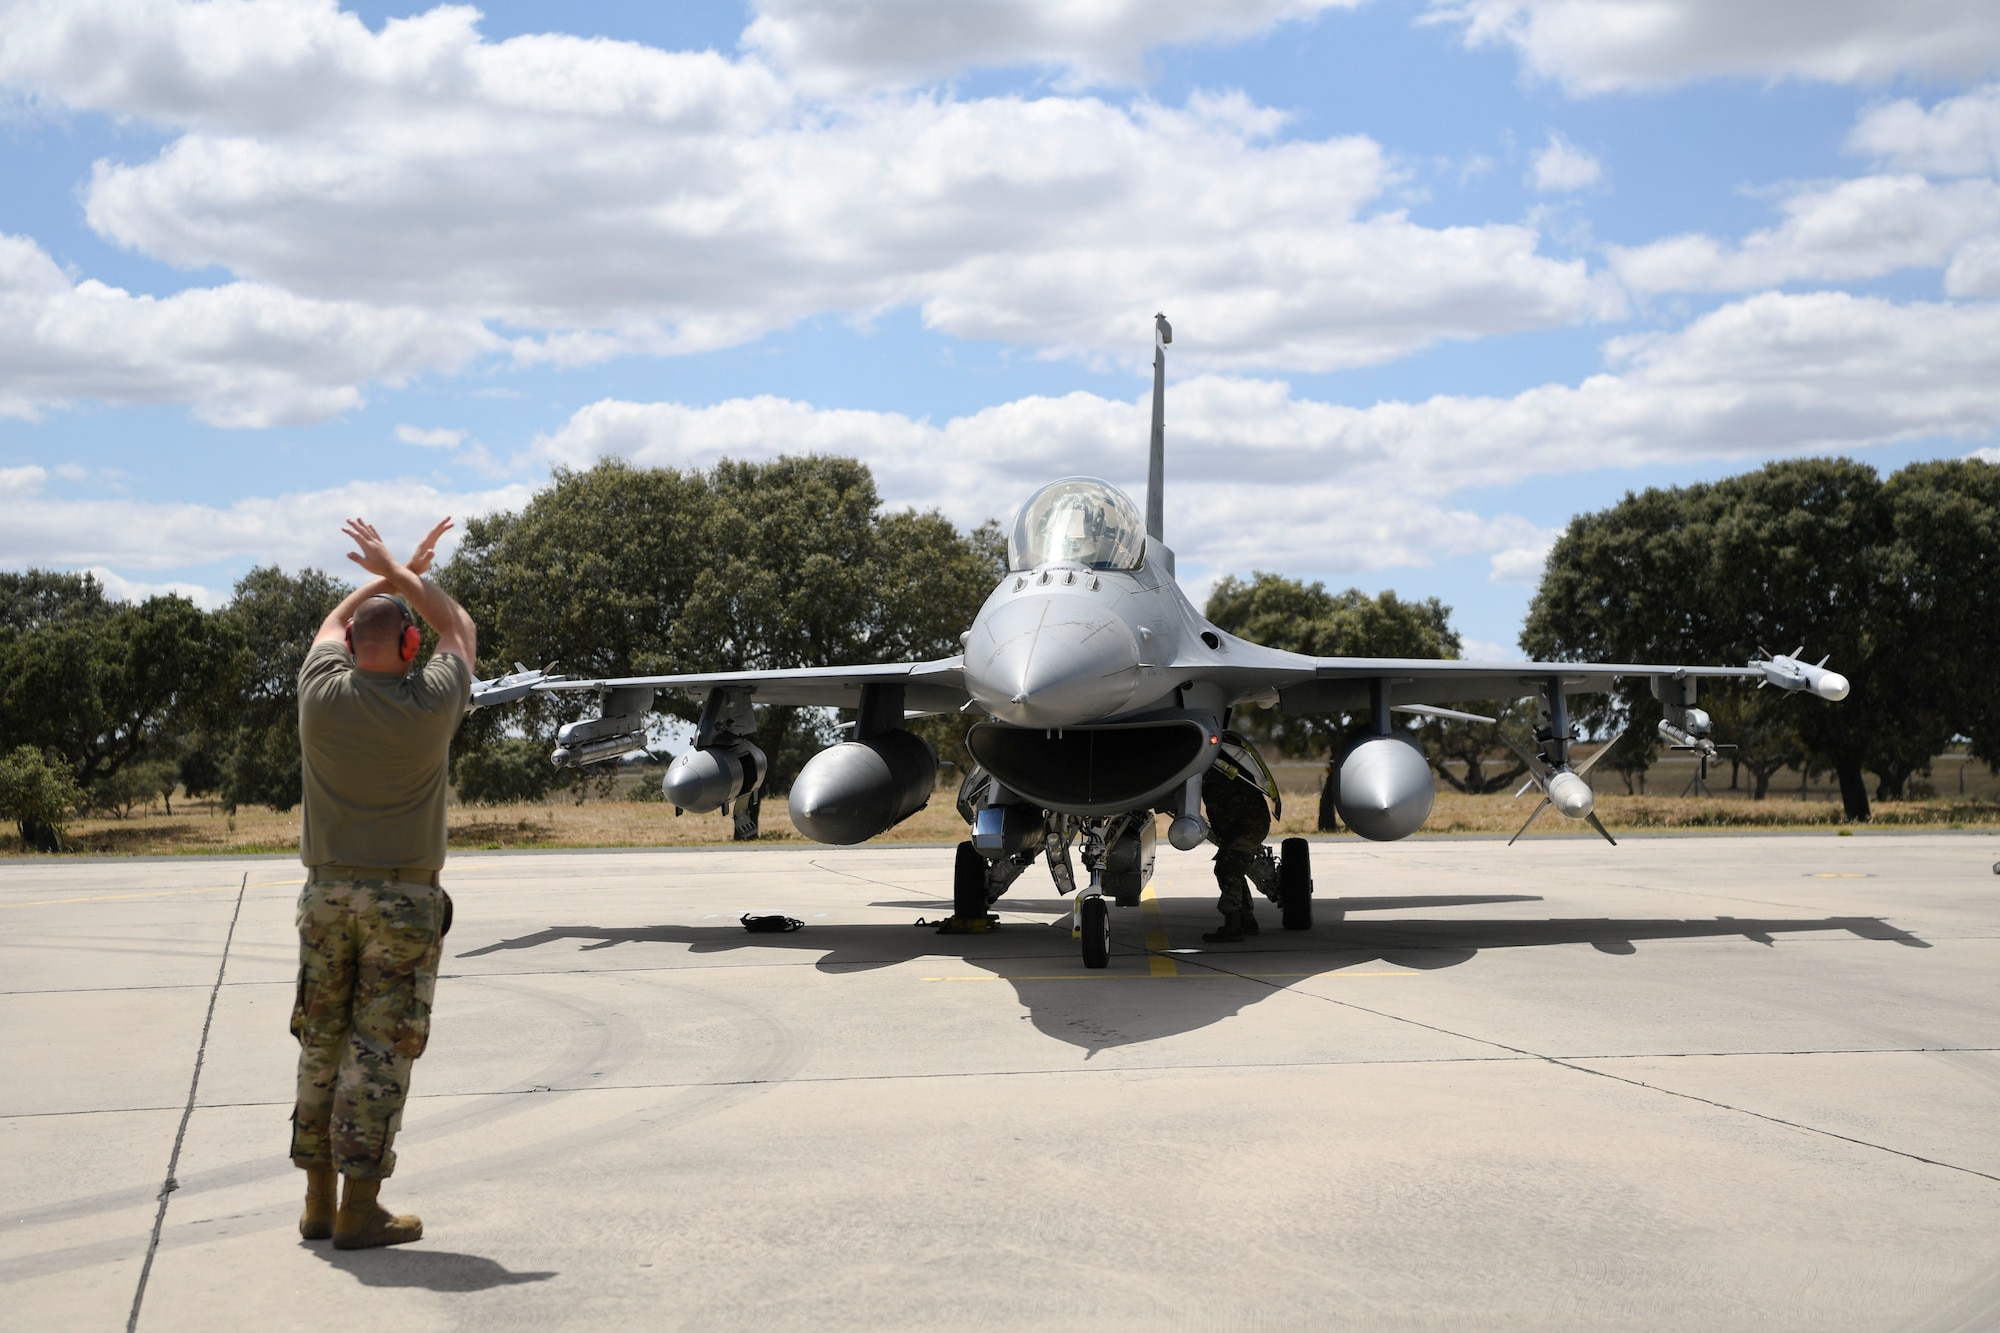 A U.S. Air Force F-16 Fighting Falcon aircraft from the 480th Fighter Squadron, from Spangdahlem Air Base, Germany, arrives in Portugal for Exercise Real Thaw 22 at Beja Air Base, Portugal, June 24, 2022. Real Thaw is an annual multi-national training exercise held by the Portuguese Air Force. The priority of this exercise is to maintain ready and postured forces that are prepared to support combatant commander objectives.  (U.S. Air Force photo by Tech. Sgt. Warren D. Spearman Jr.)